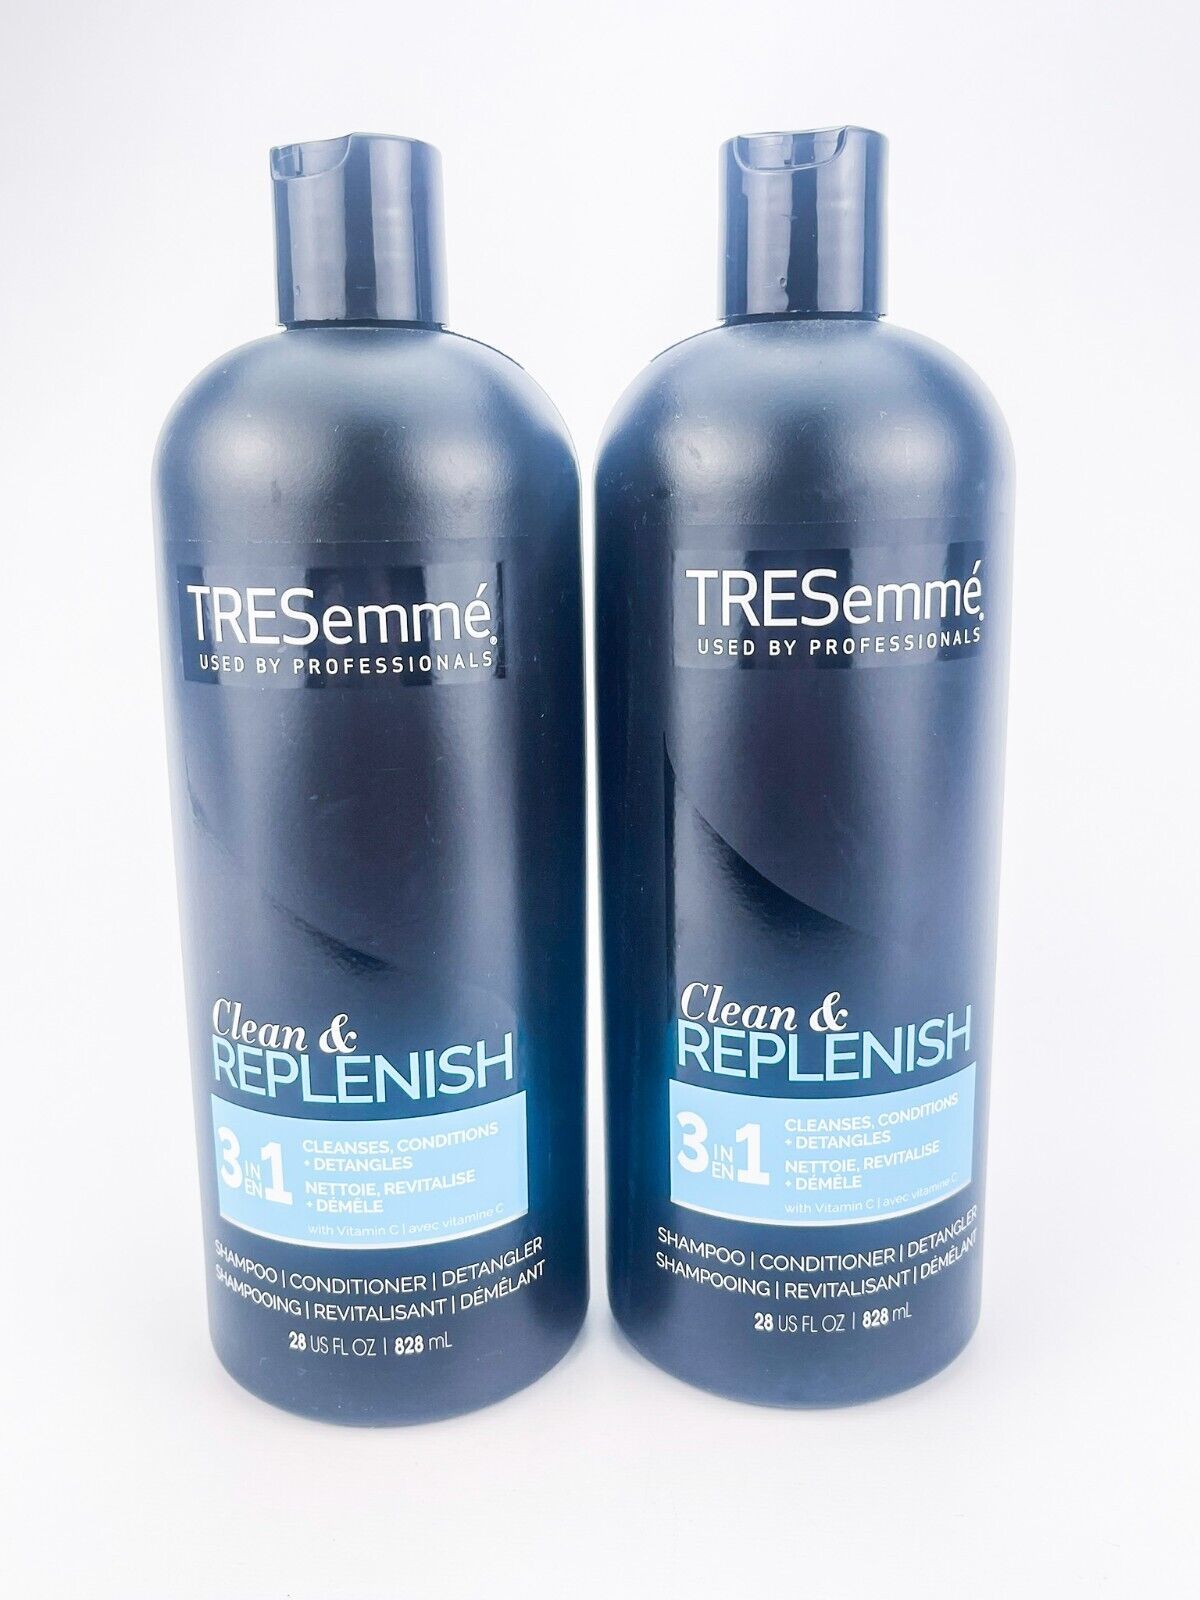 TRESemme Professional 3 In 1 Shampoo Conditioner Clean Replenish 28oz Lot of 2 - $41.55